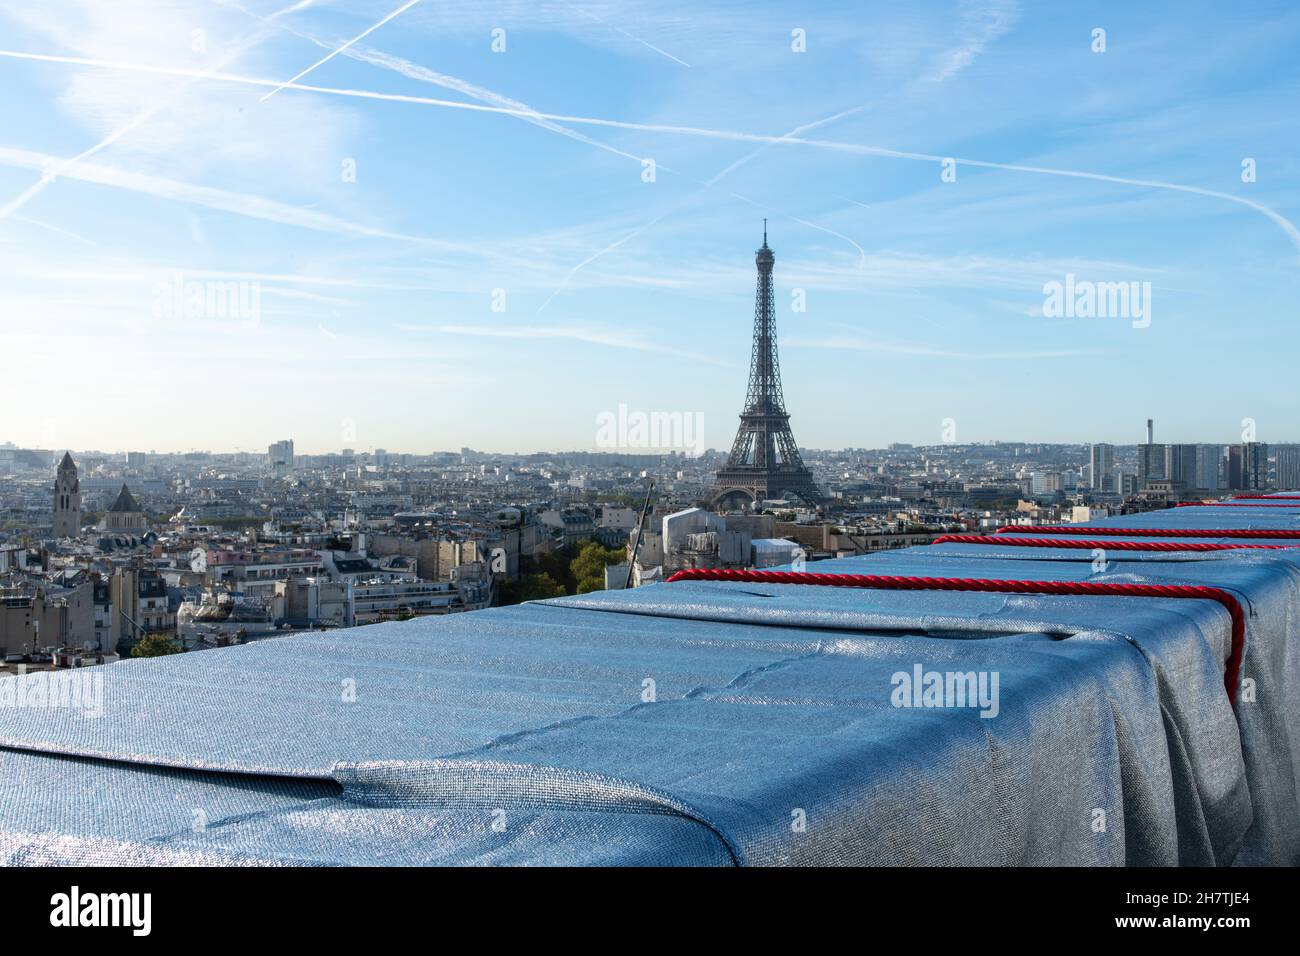 Paris, France-September 2021; High level panoramic view of Eiffel Tower seen from top wrapped Arc de Triomphe art installation by Christo with red rop Stock Photo